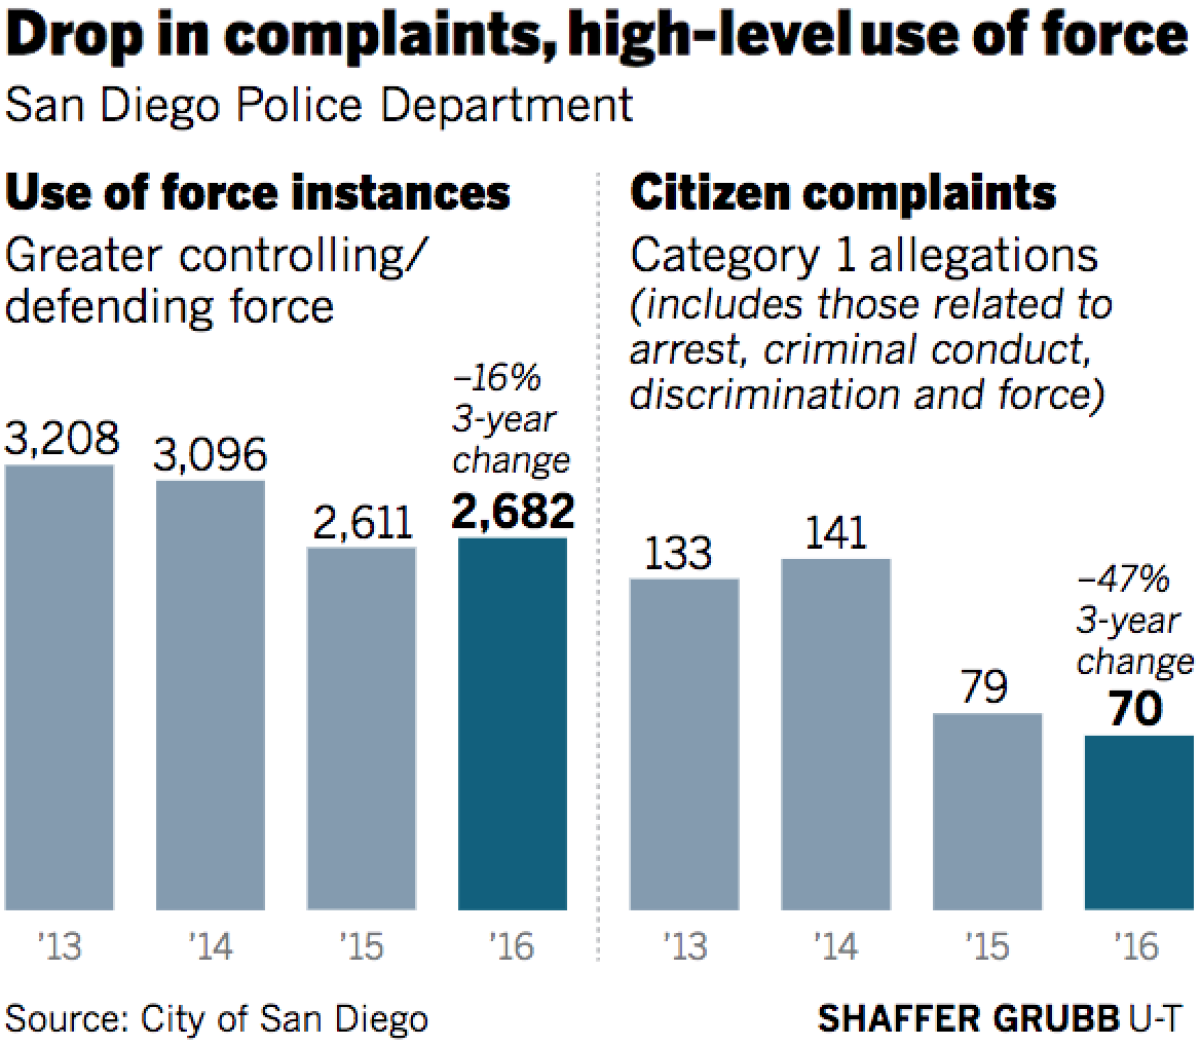 Drop in complaints, high-level use of force